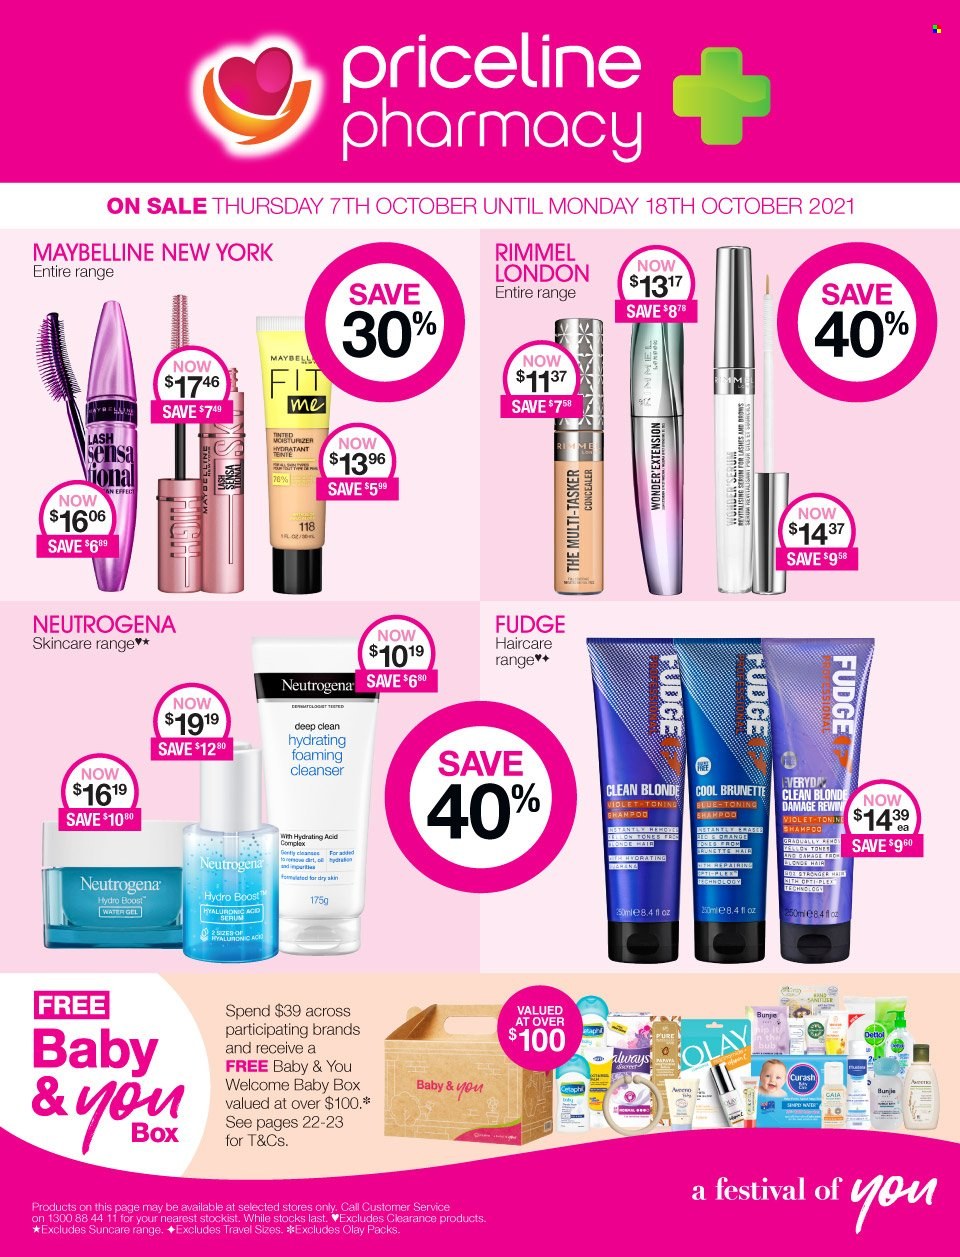 thumbnail - Priceline Pharmacy Catalogue - 7 Oct 2021 - 18 Oct 2021 - Sales products - cleanser, Neutrogena, Olay, fudge, corrector, Rimmel, Maybelline. Page 1.